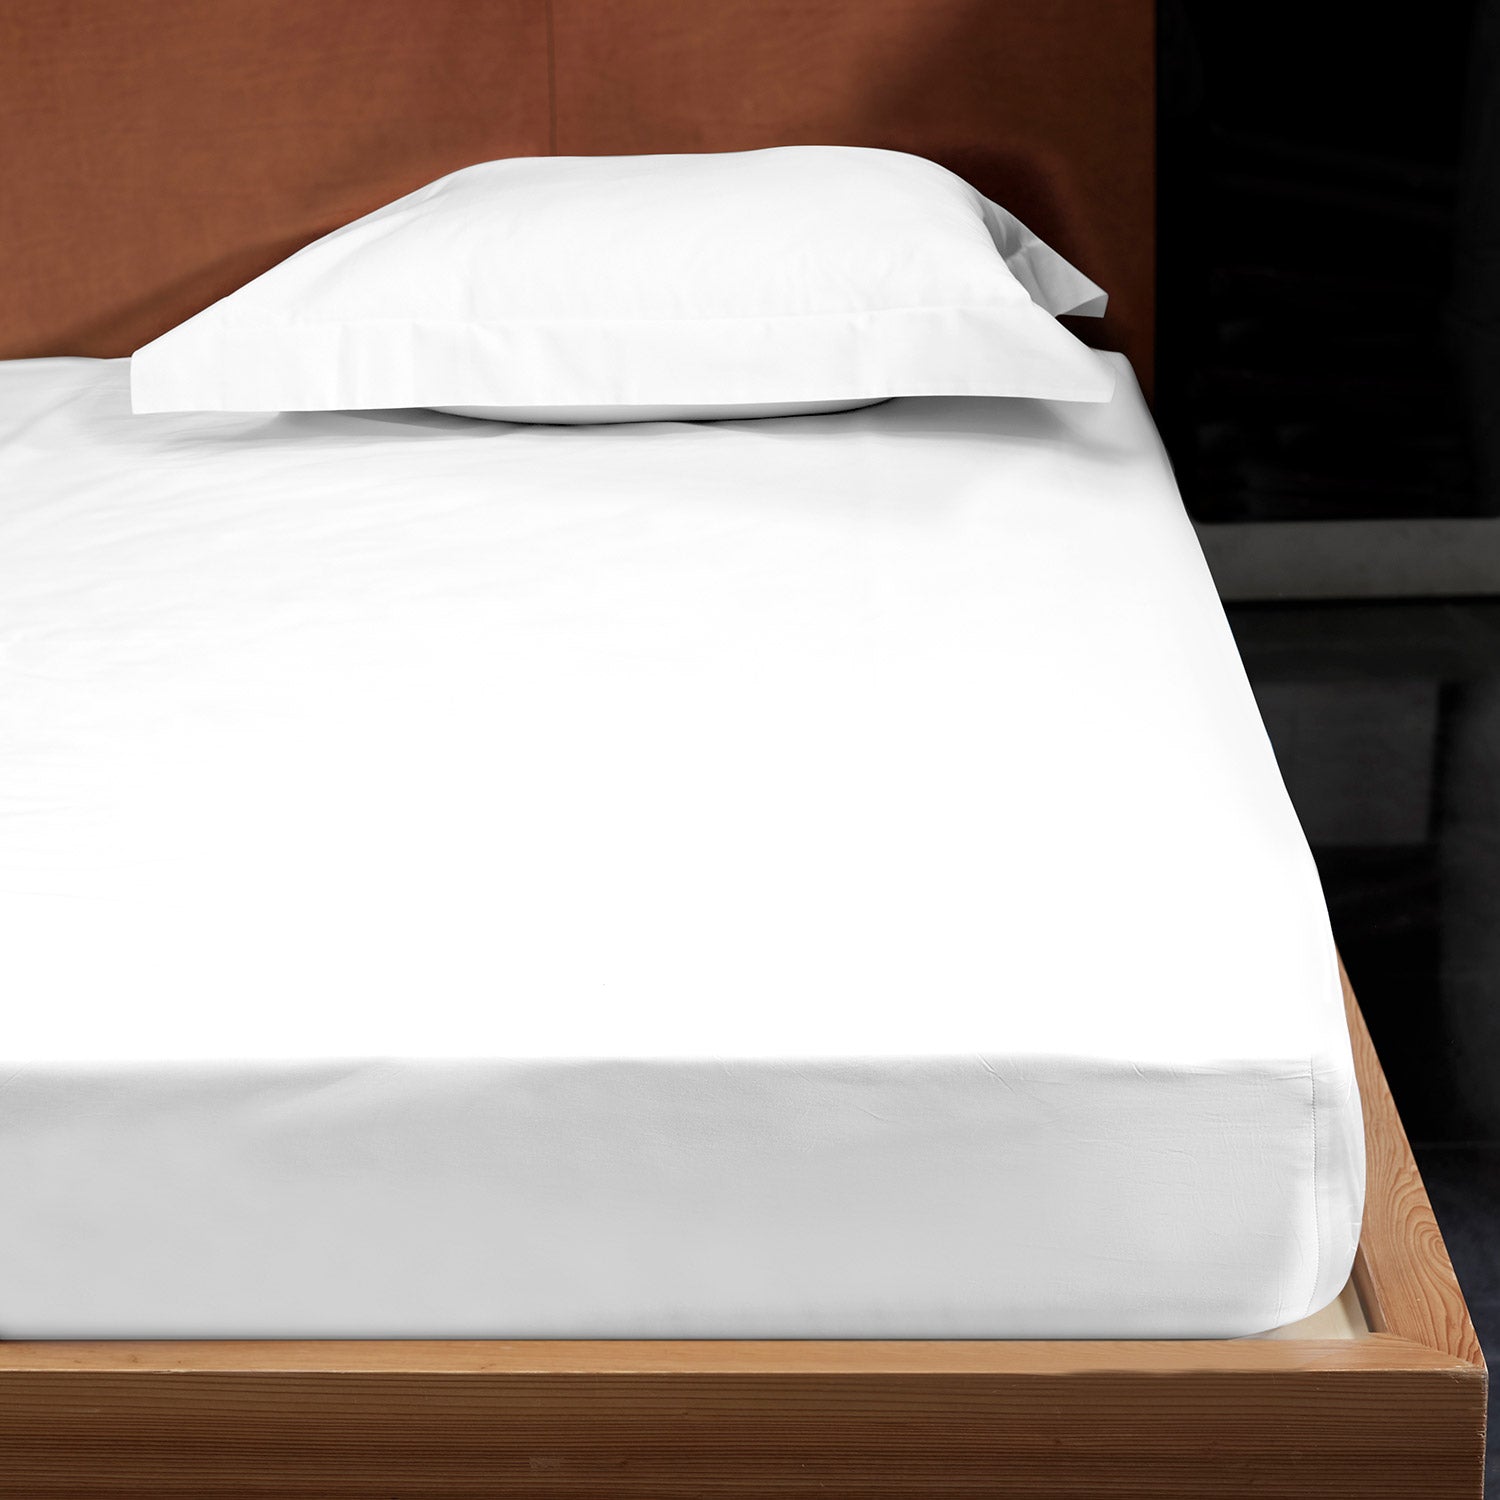 Nuvola Sateen Sheets & Pillowcases, White Fitted Sheet / Queen